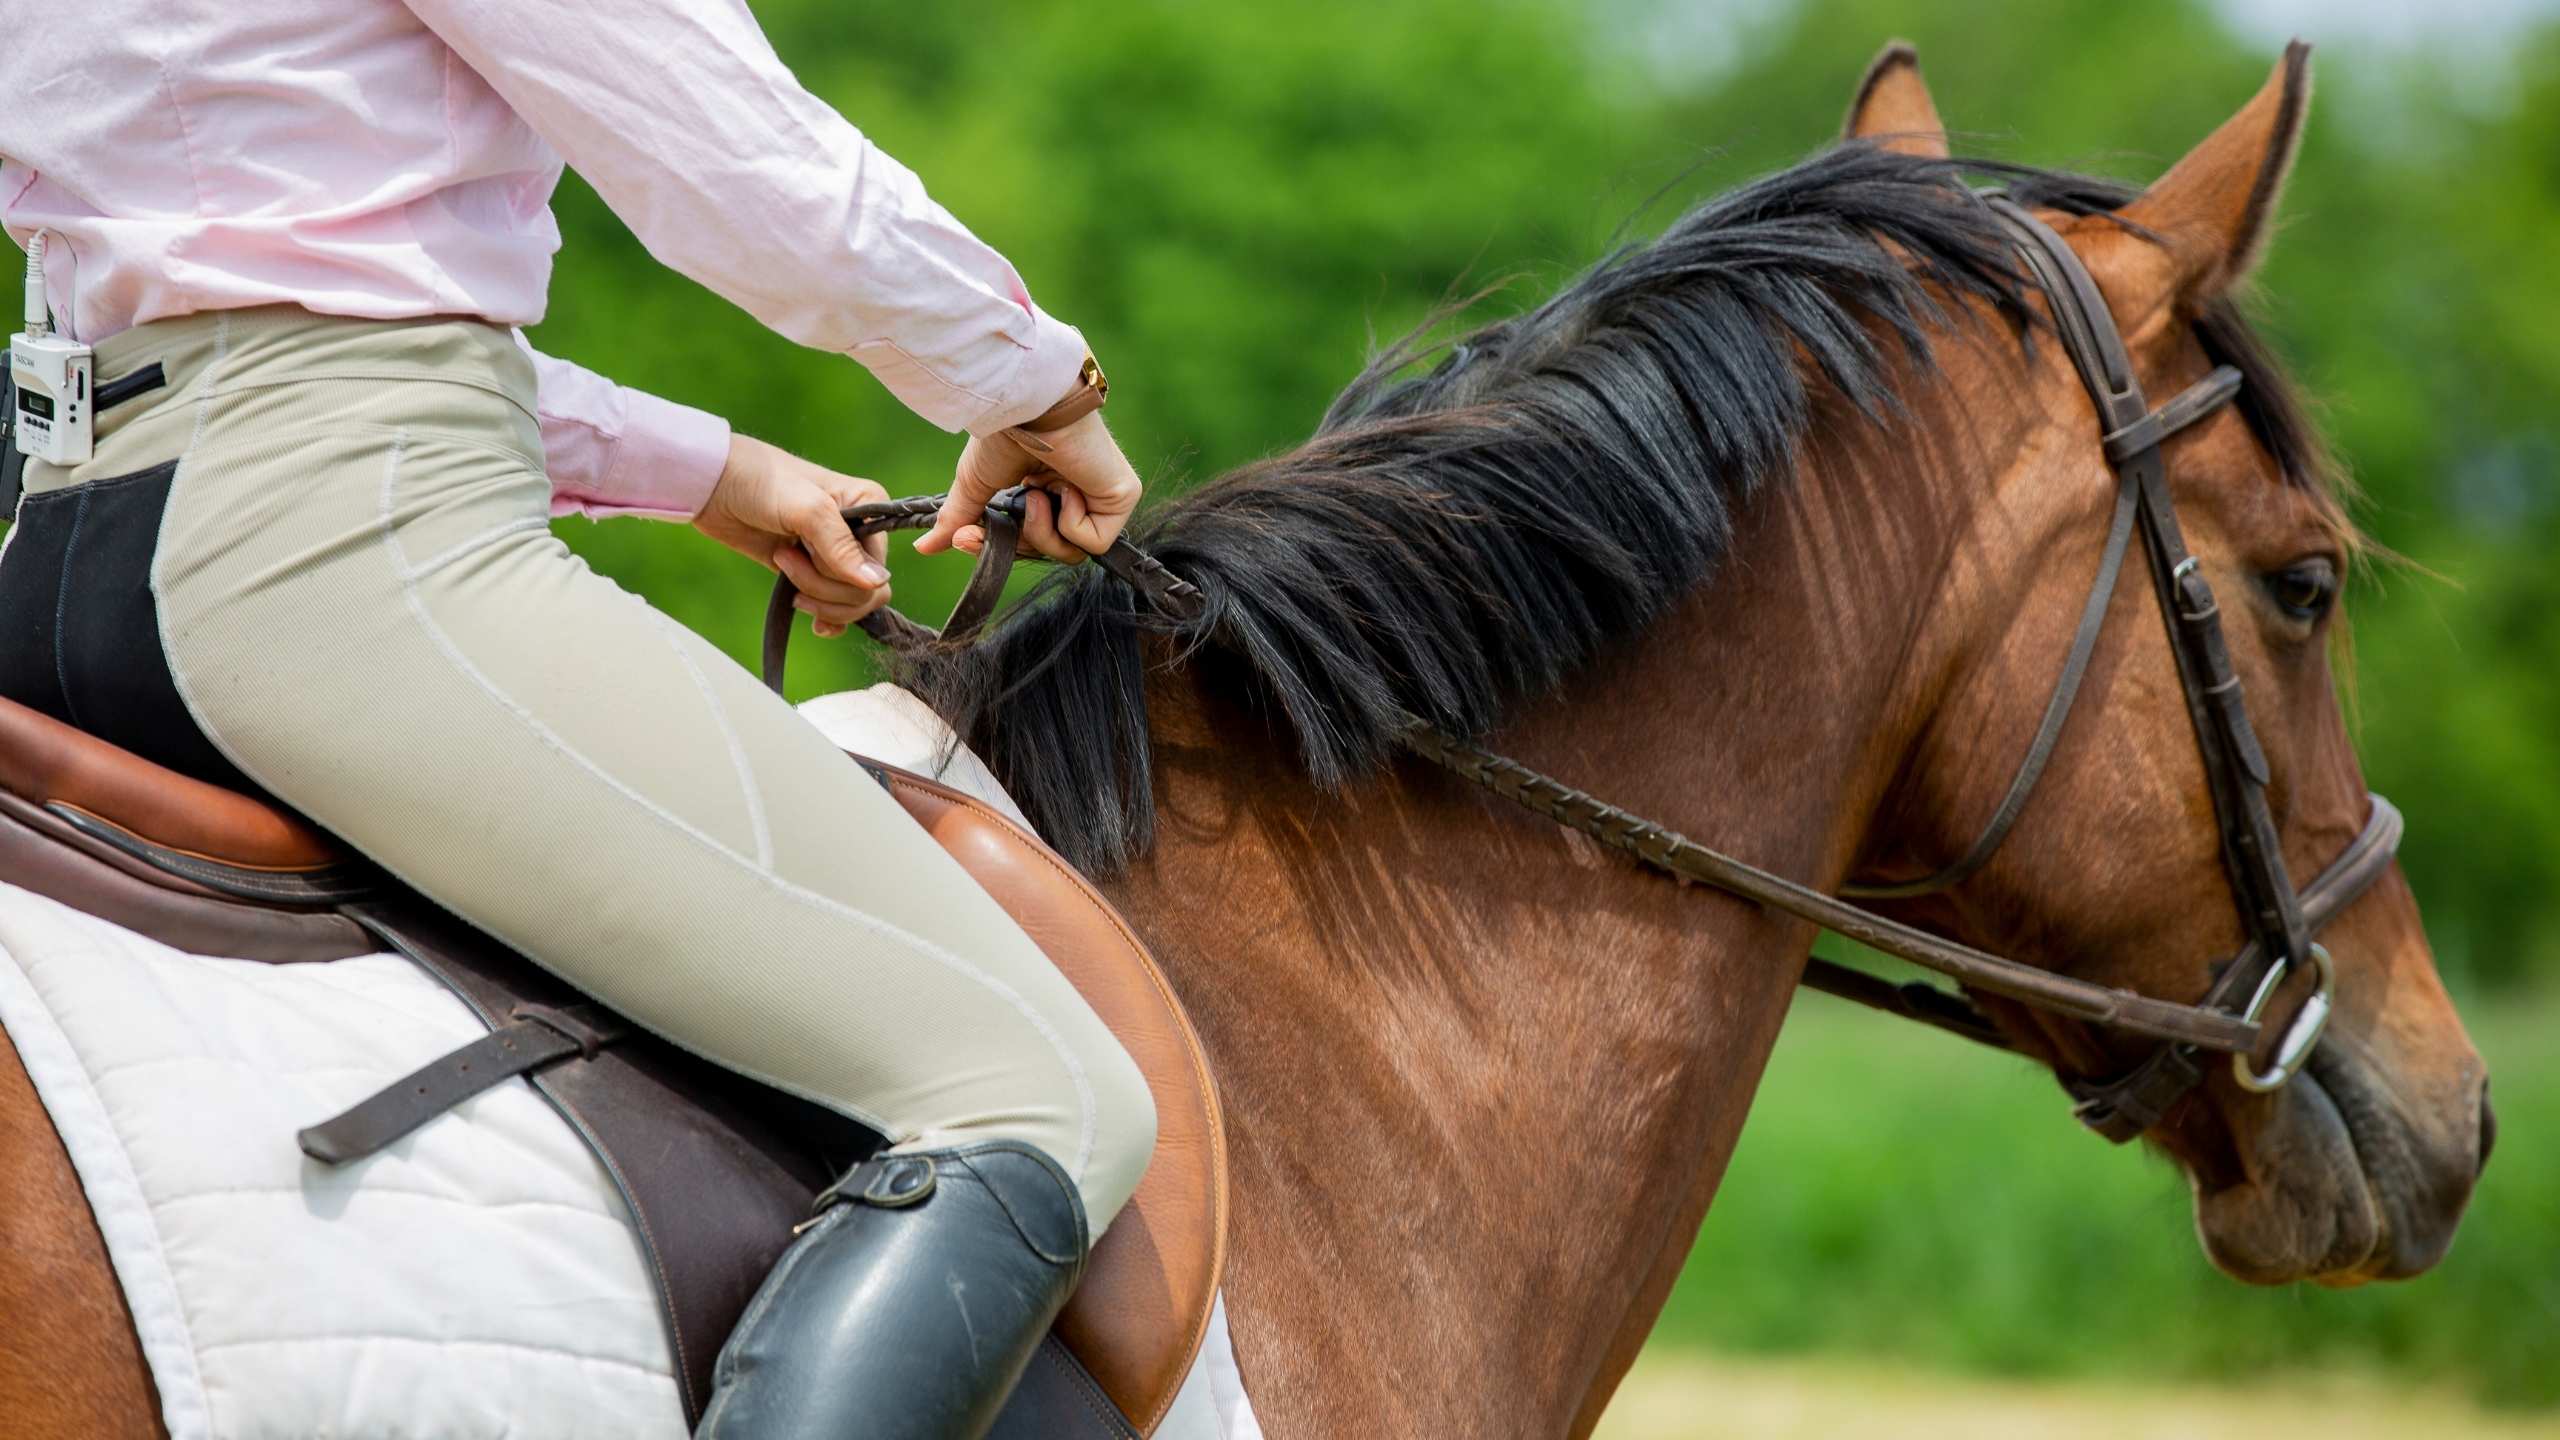 Are You a “Type-A” Rider? Here’s why less striving may help your riding